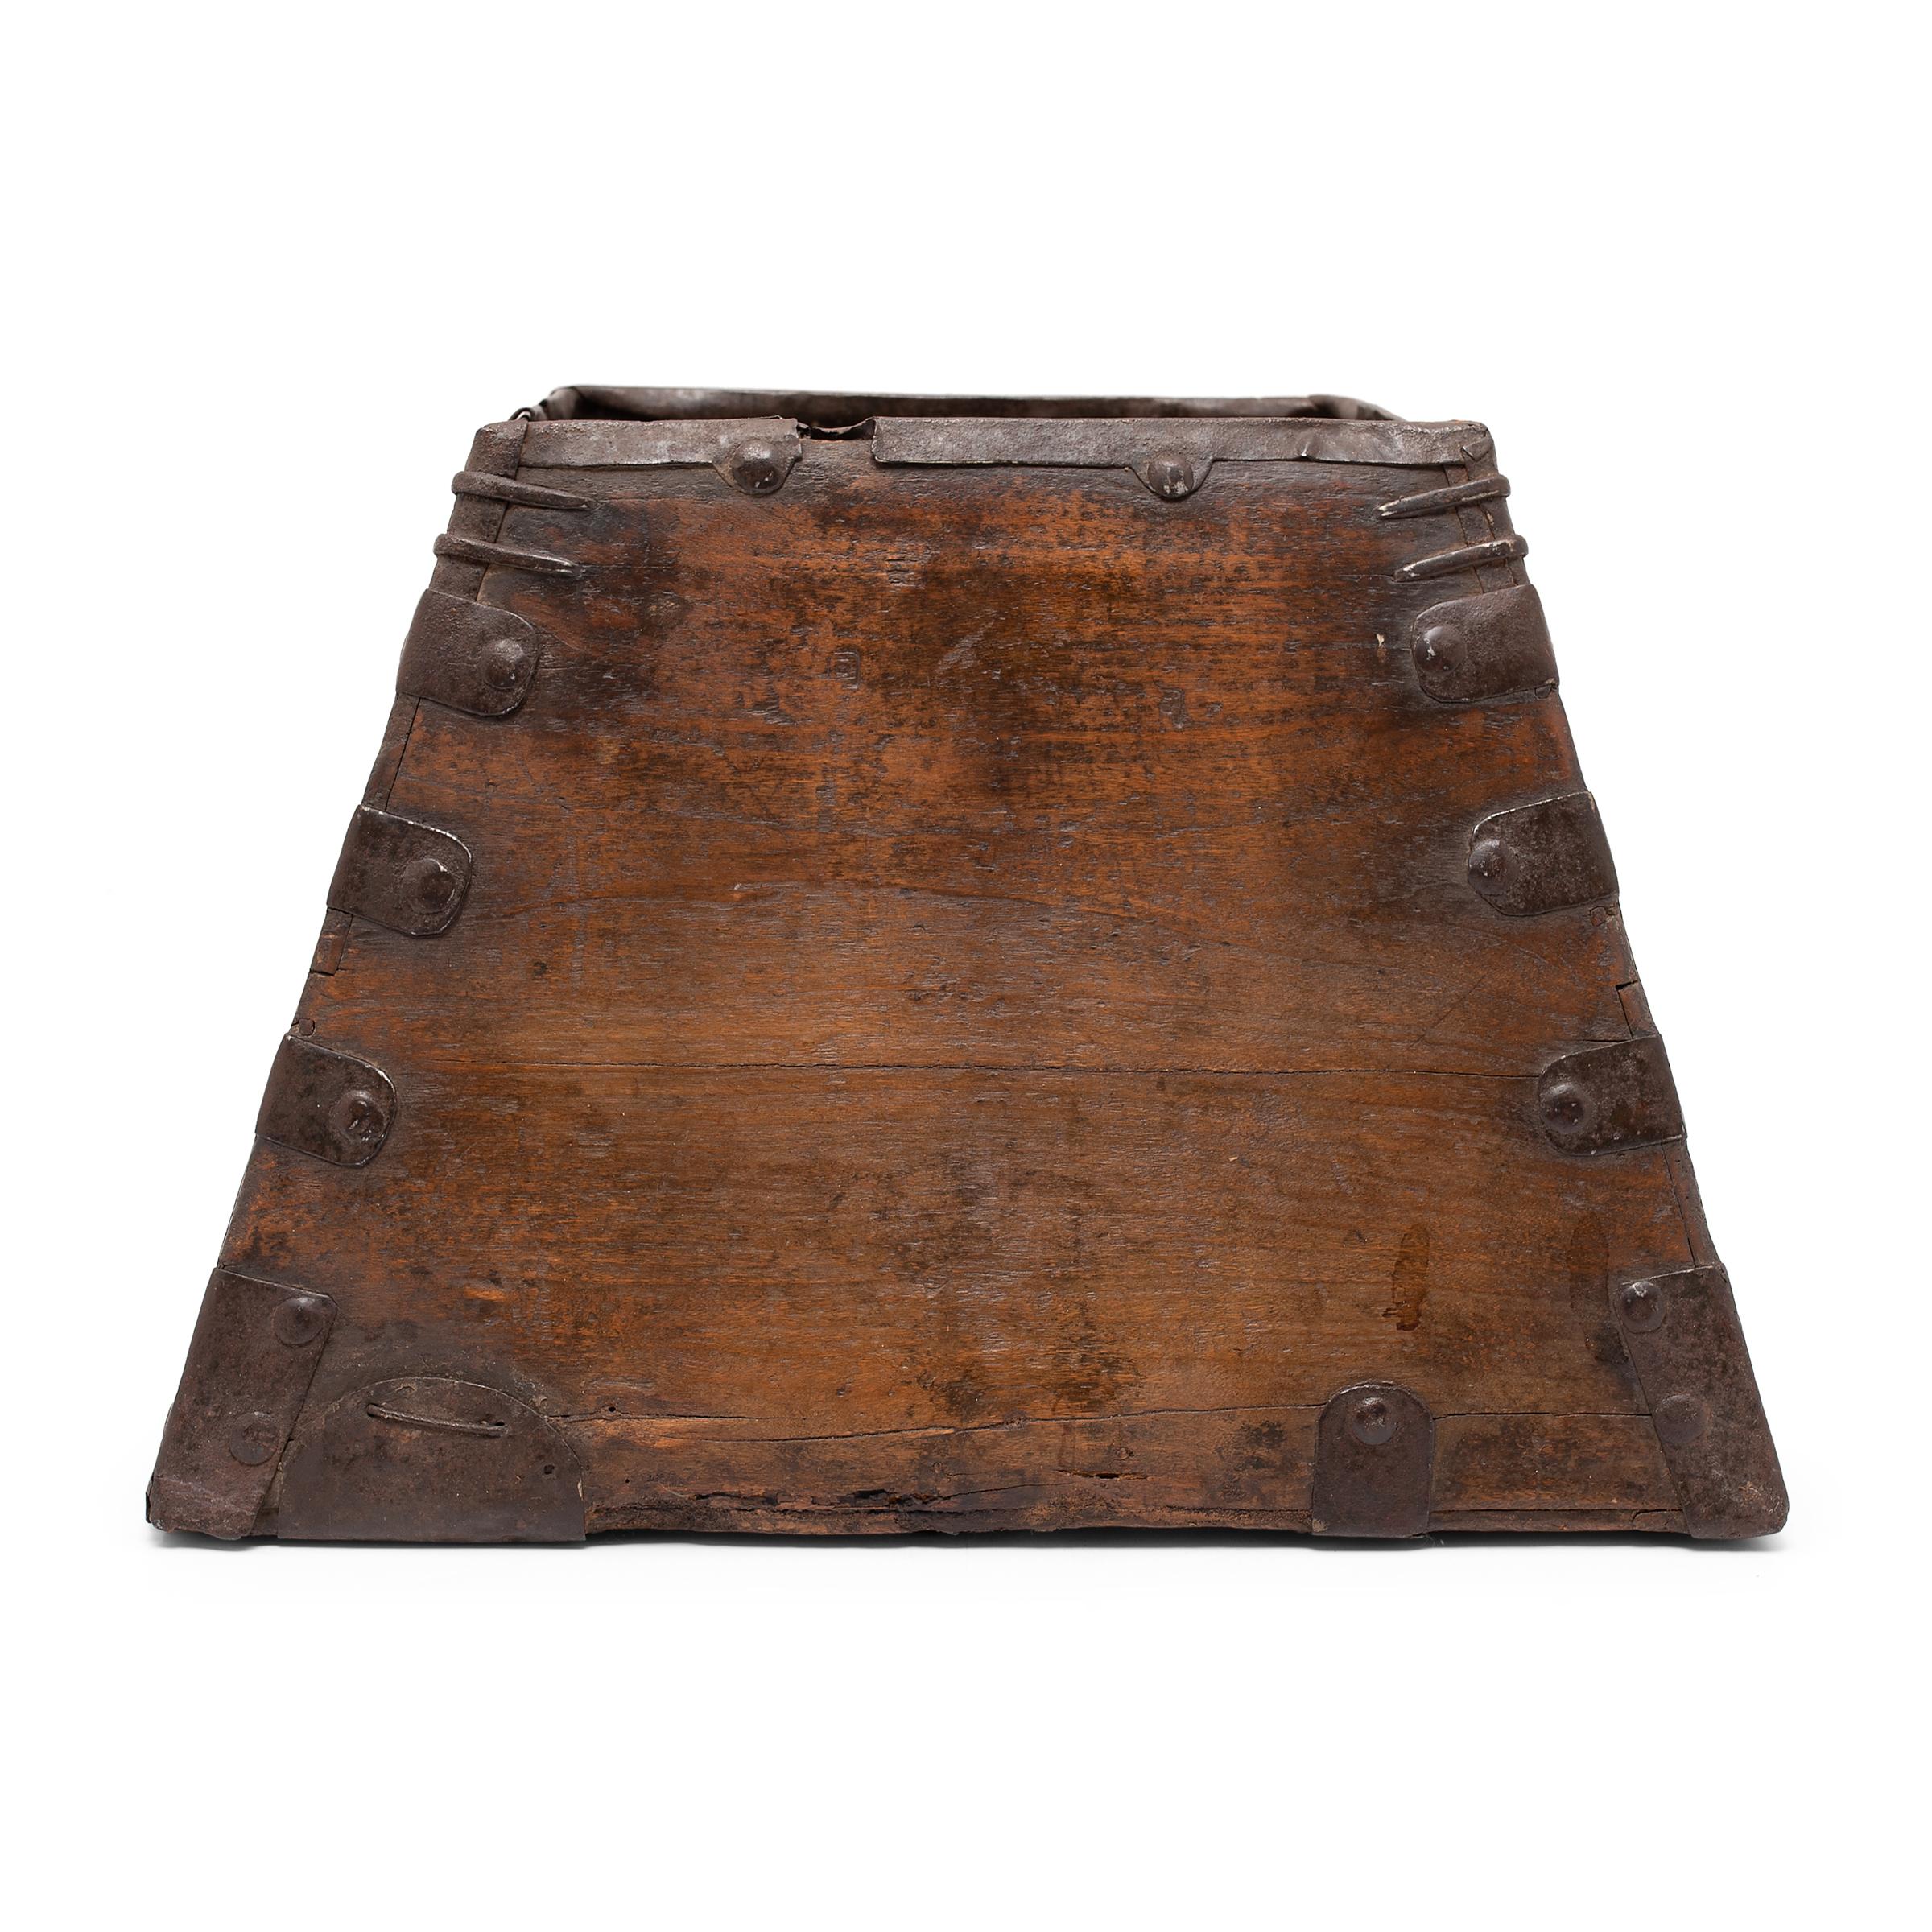 This rustic container was made over a hundred years ago to measure and hold a dou of rice, an ancient Chinese measurement. The rice measure has a square form with tapered sides and edges trimmed with iron fittings to protect against damage. This